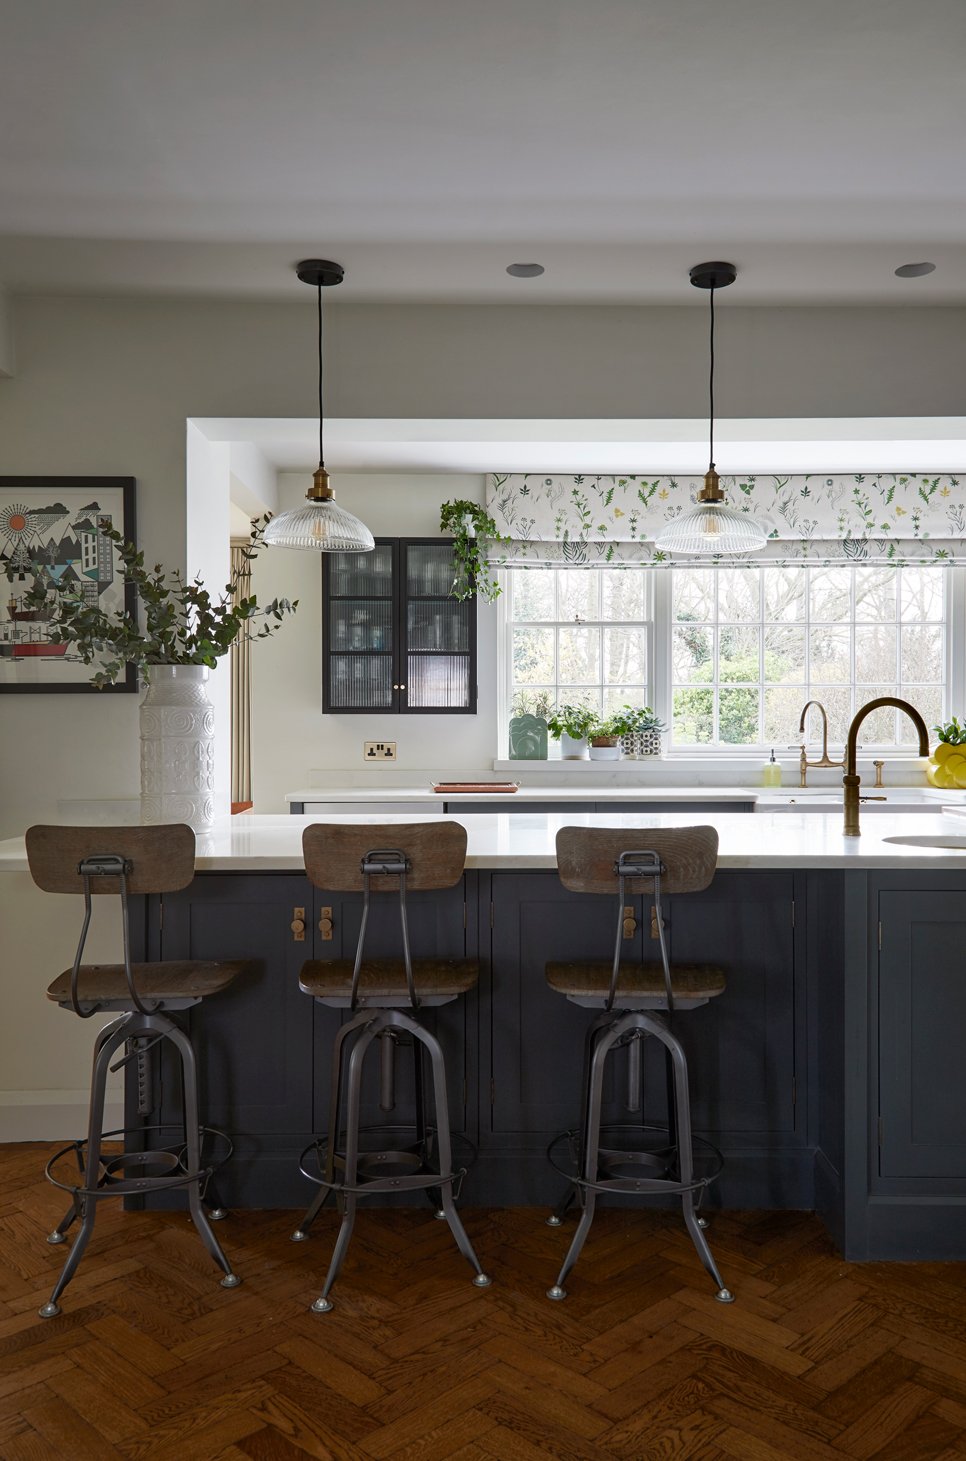 Hitchin kitchen full house design by Alison Anderson Interiors.jpg